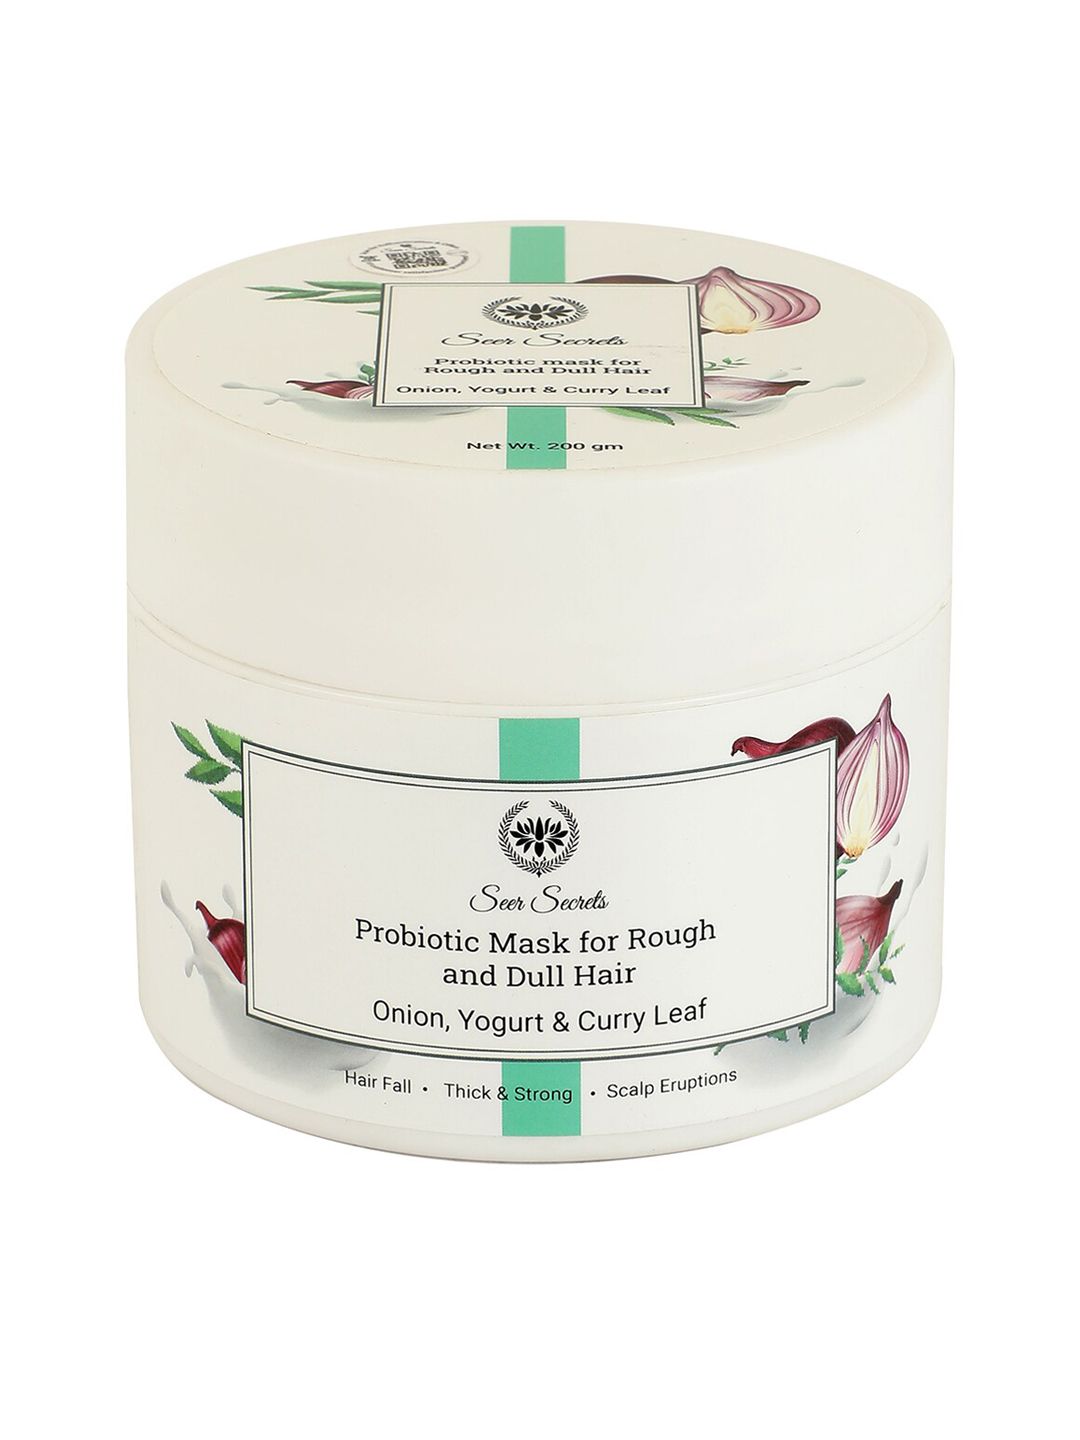 Seer Secrets Probiotic Hair Mask For Rough & Dull Hairs - 200g Price in India